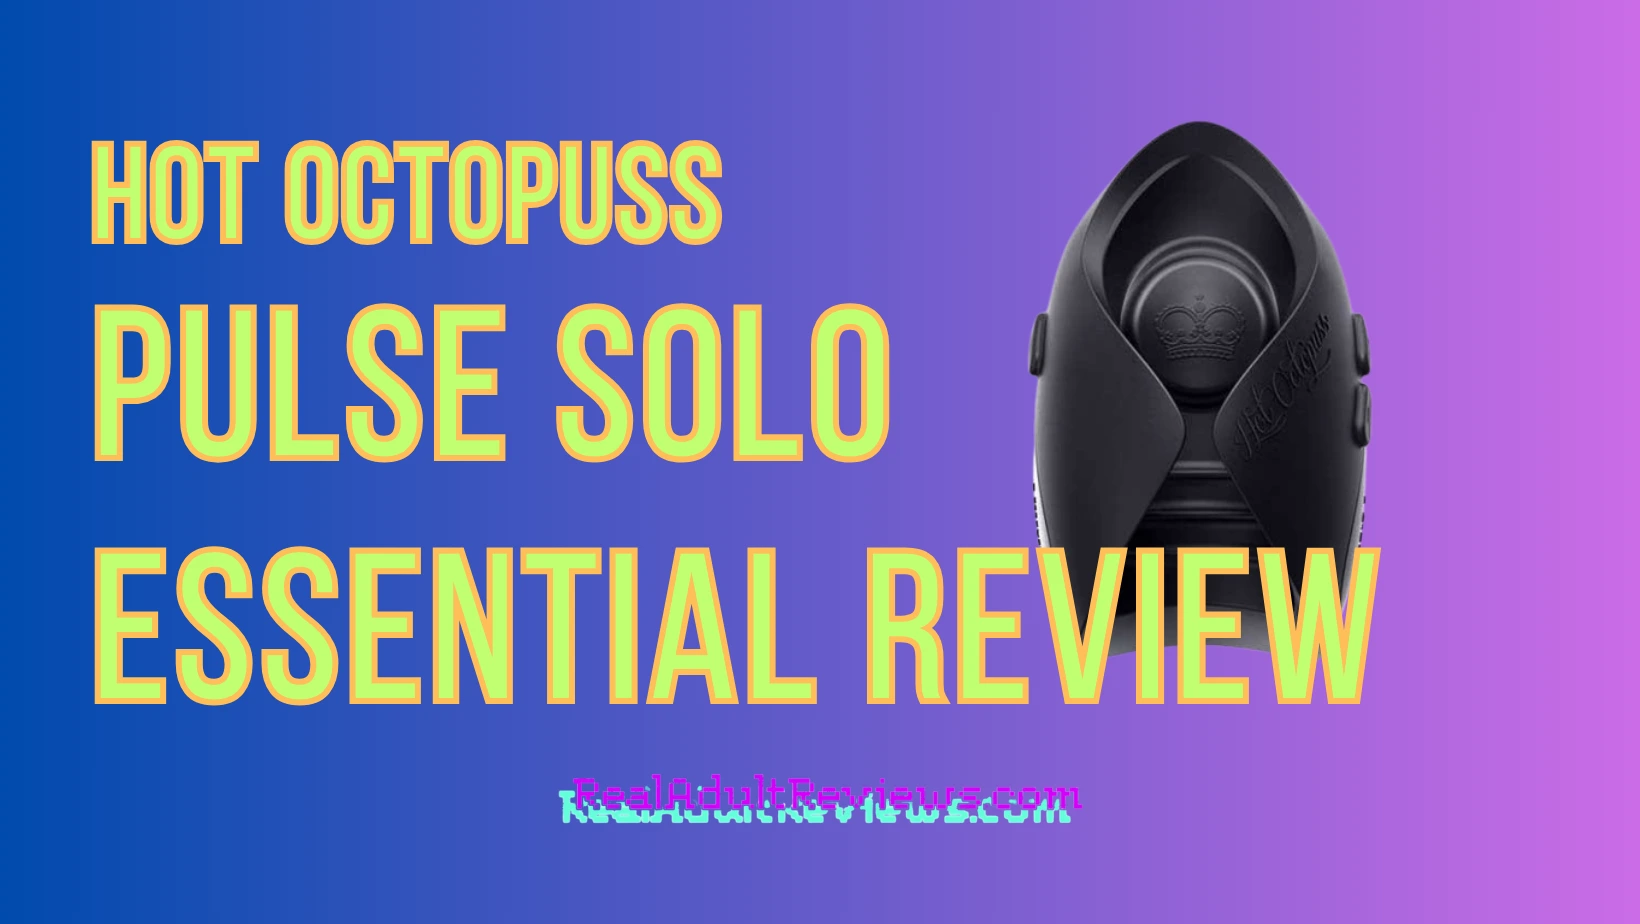 Are Powerful Vibrations a Blessing or a Curse? Hot Octopuss Pulse Solo Essential Men Vibrator Review